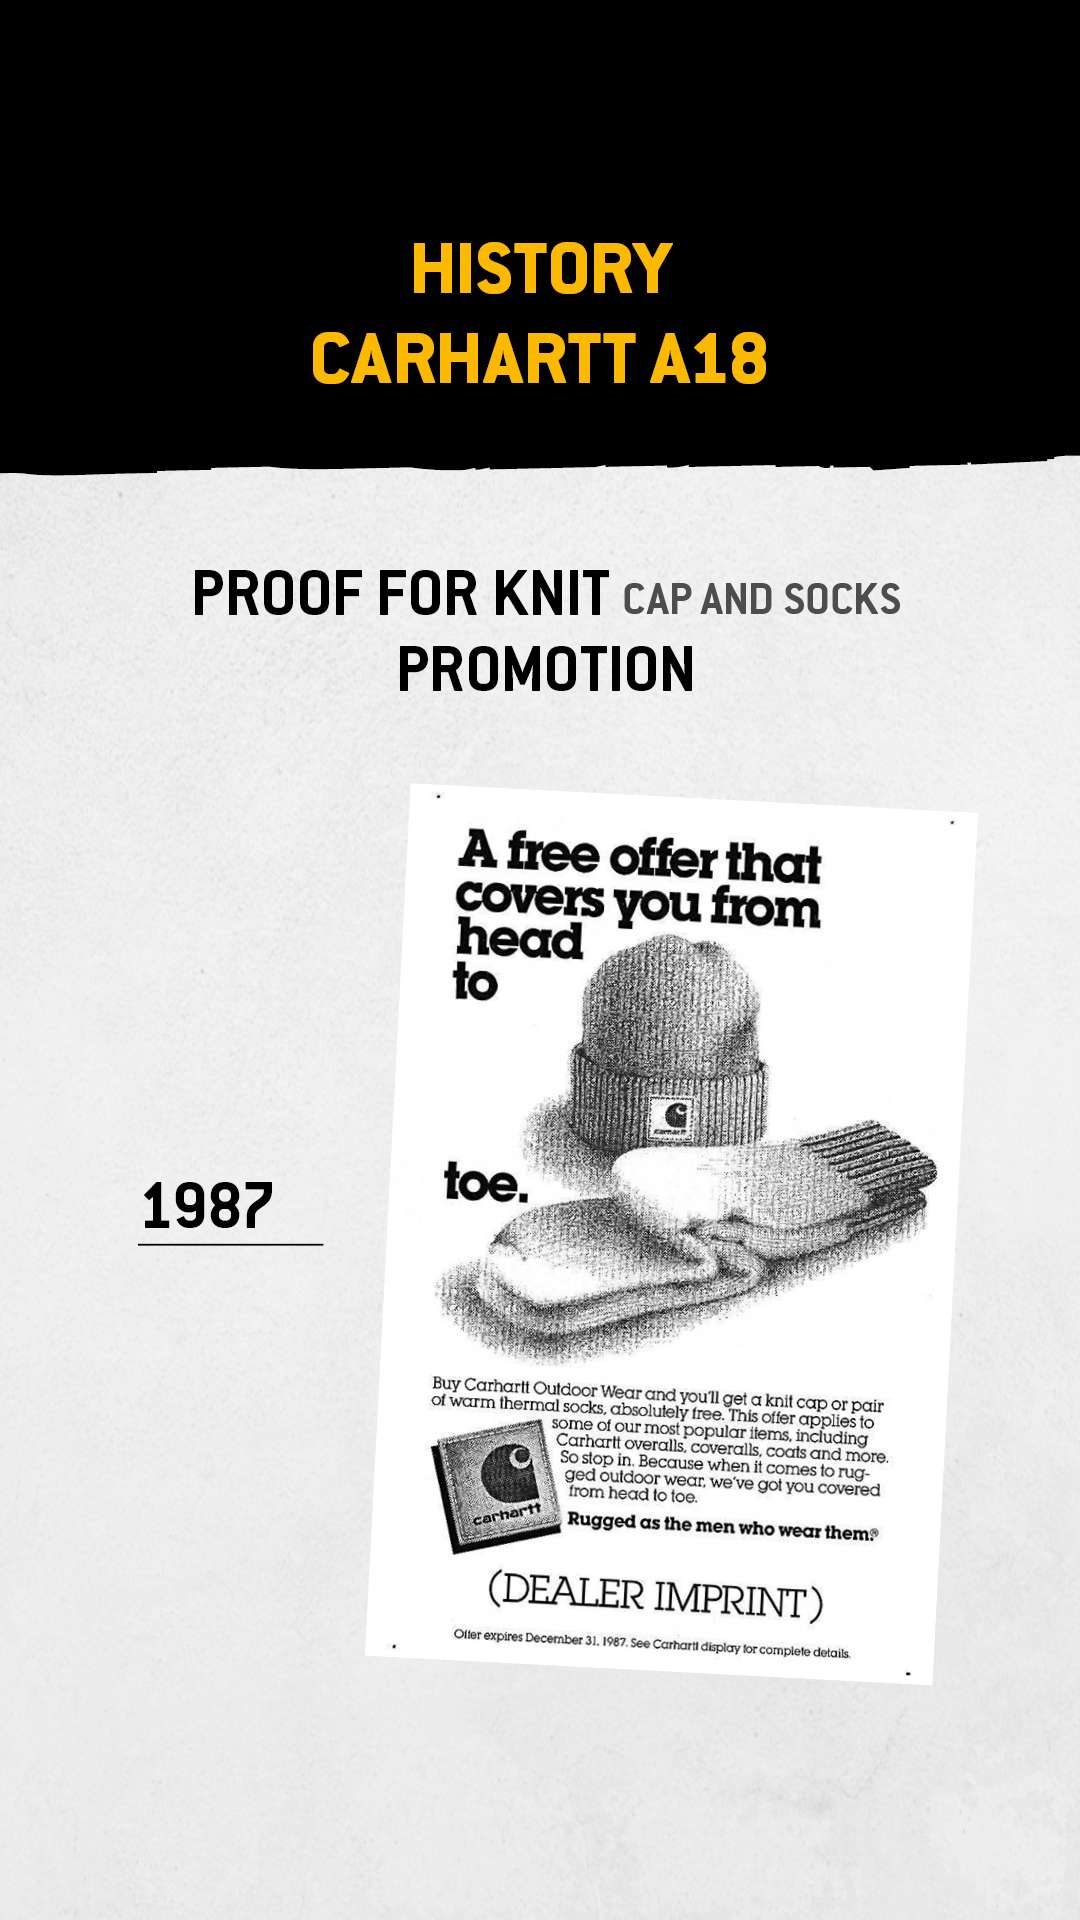 Proof for knit cap and socks promotion, 1987